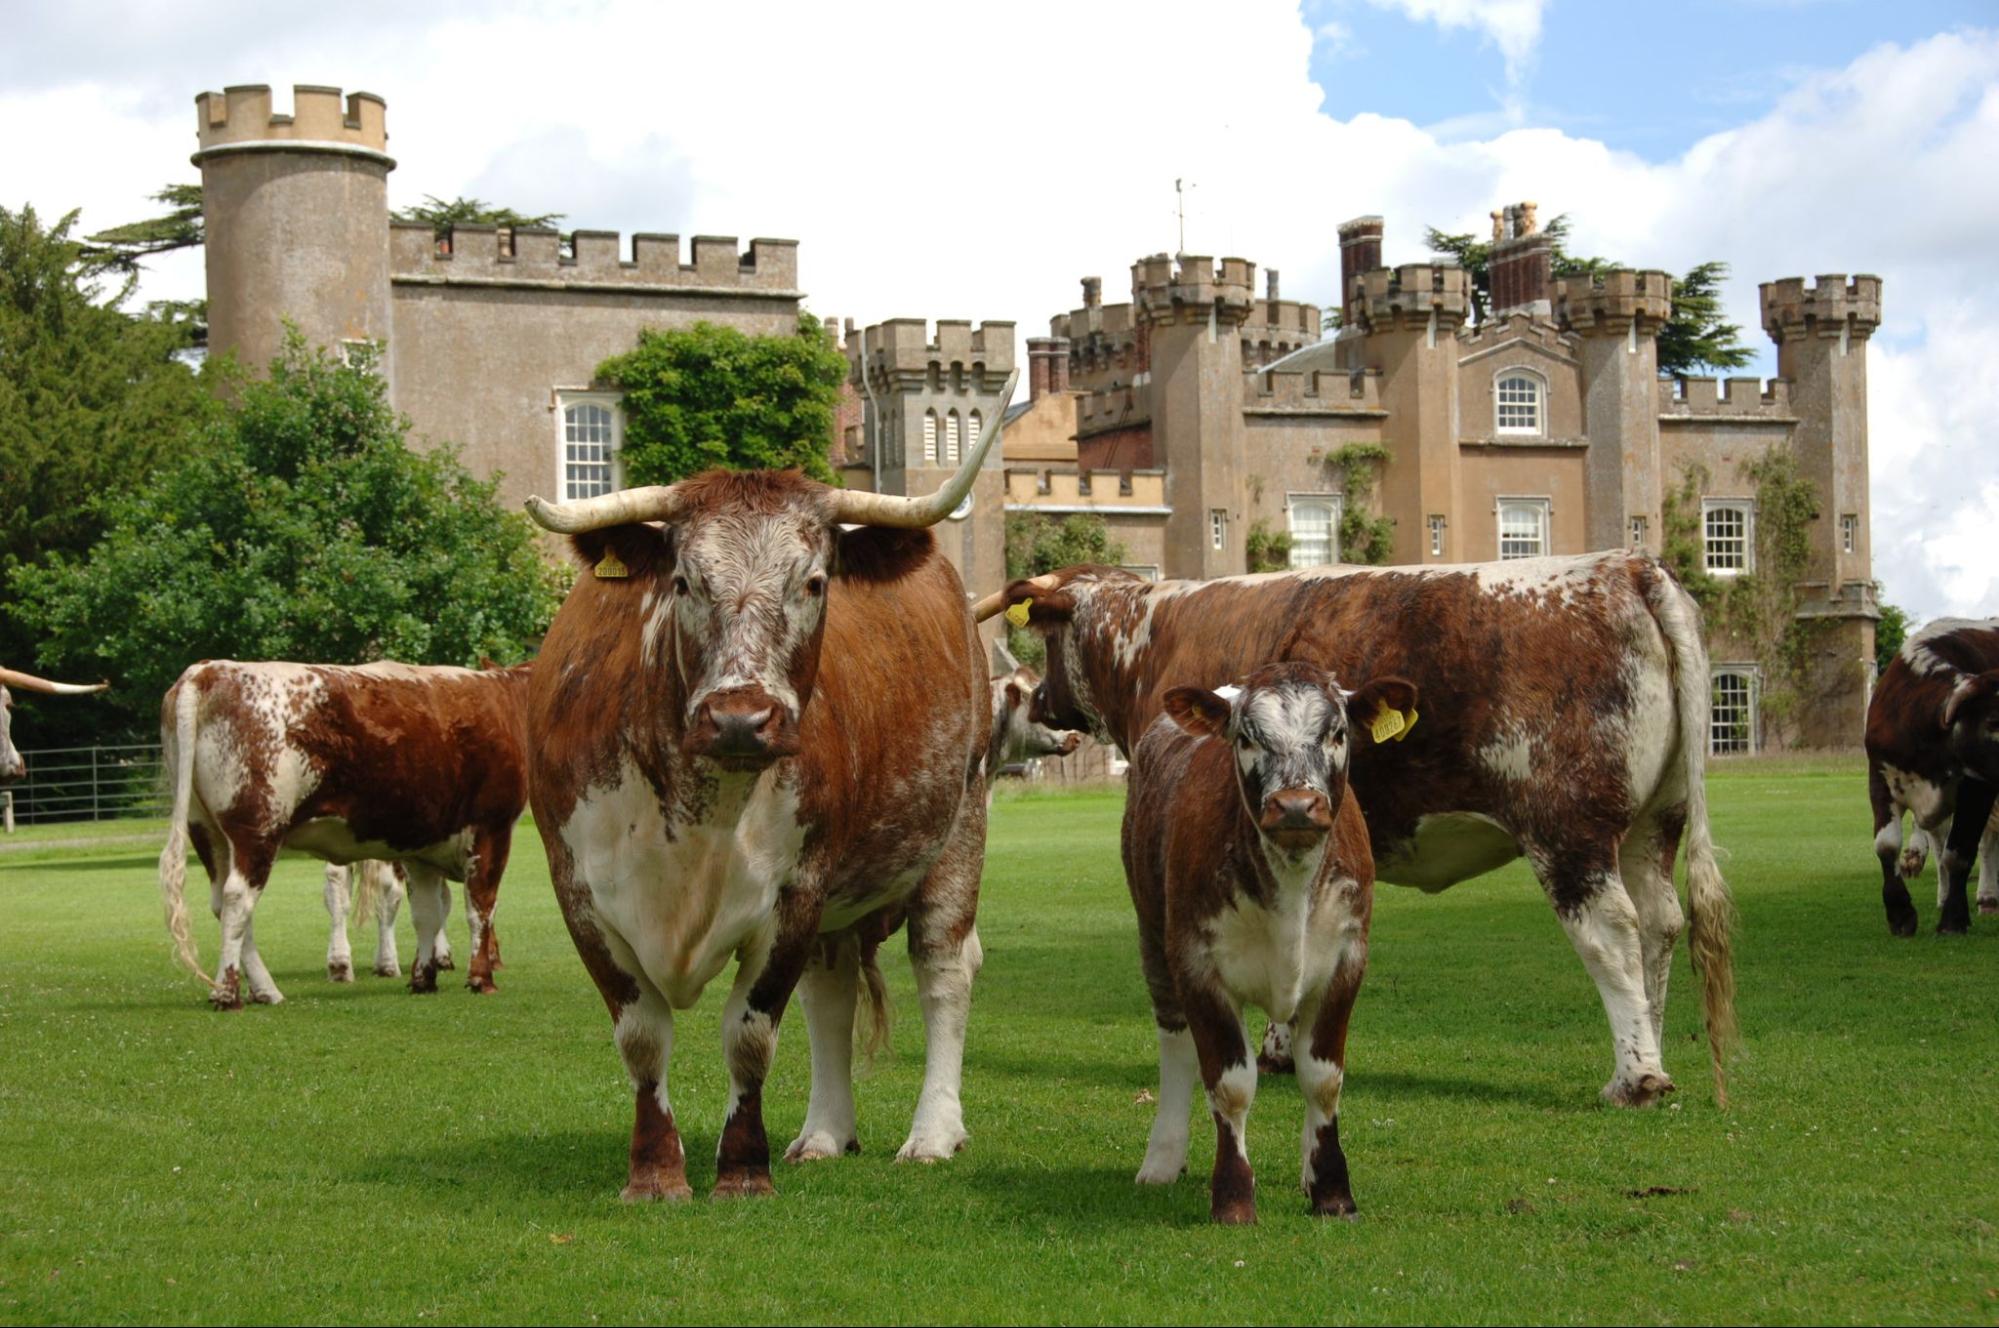 Cows on the lawn of an English estate building with turrets